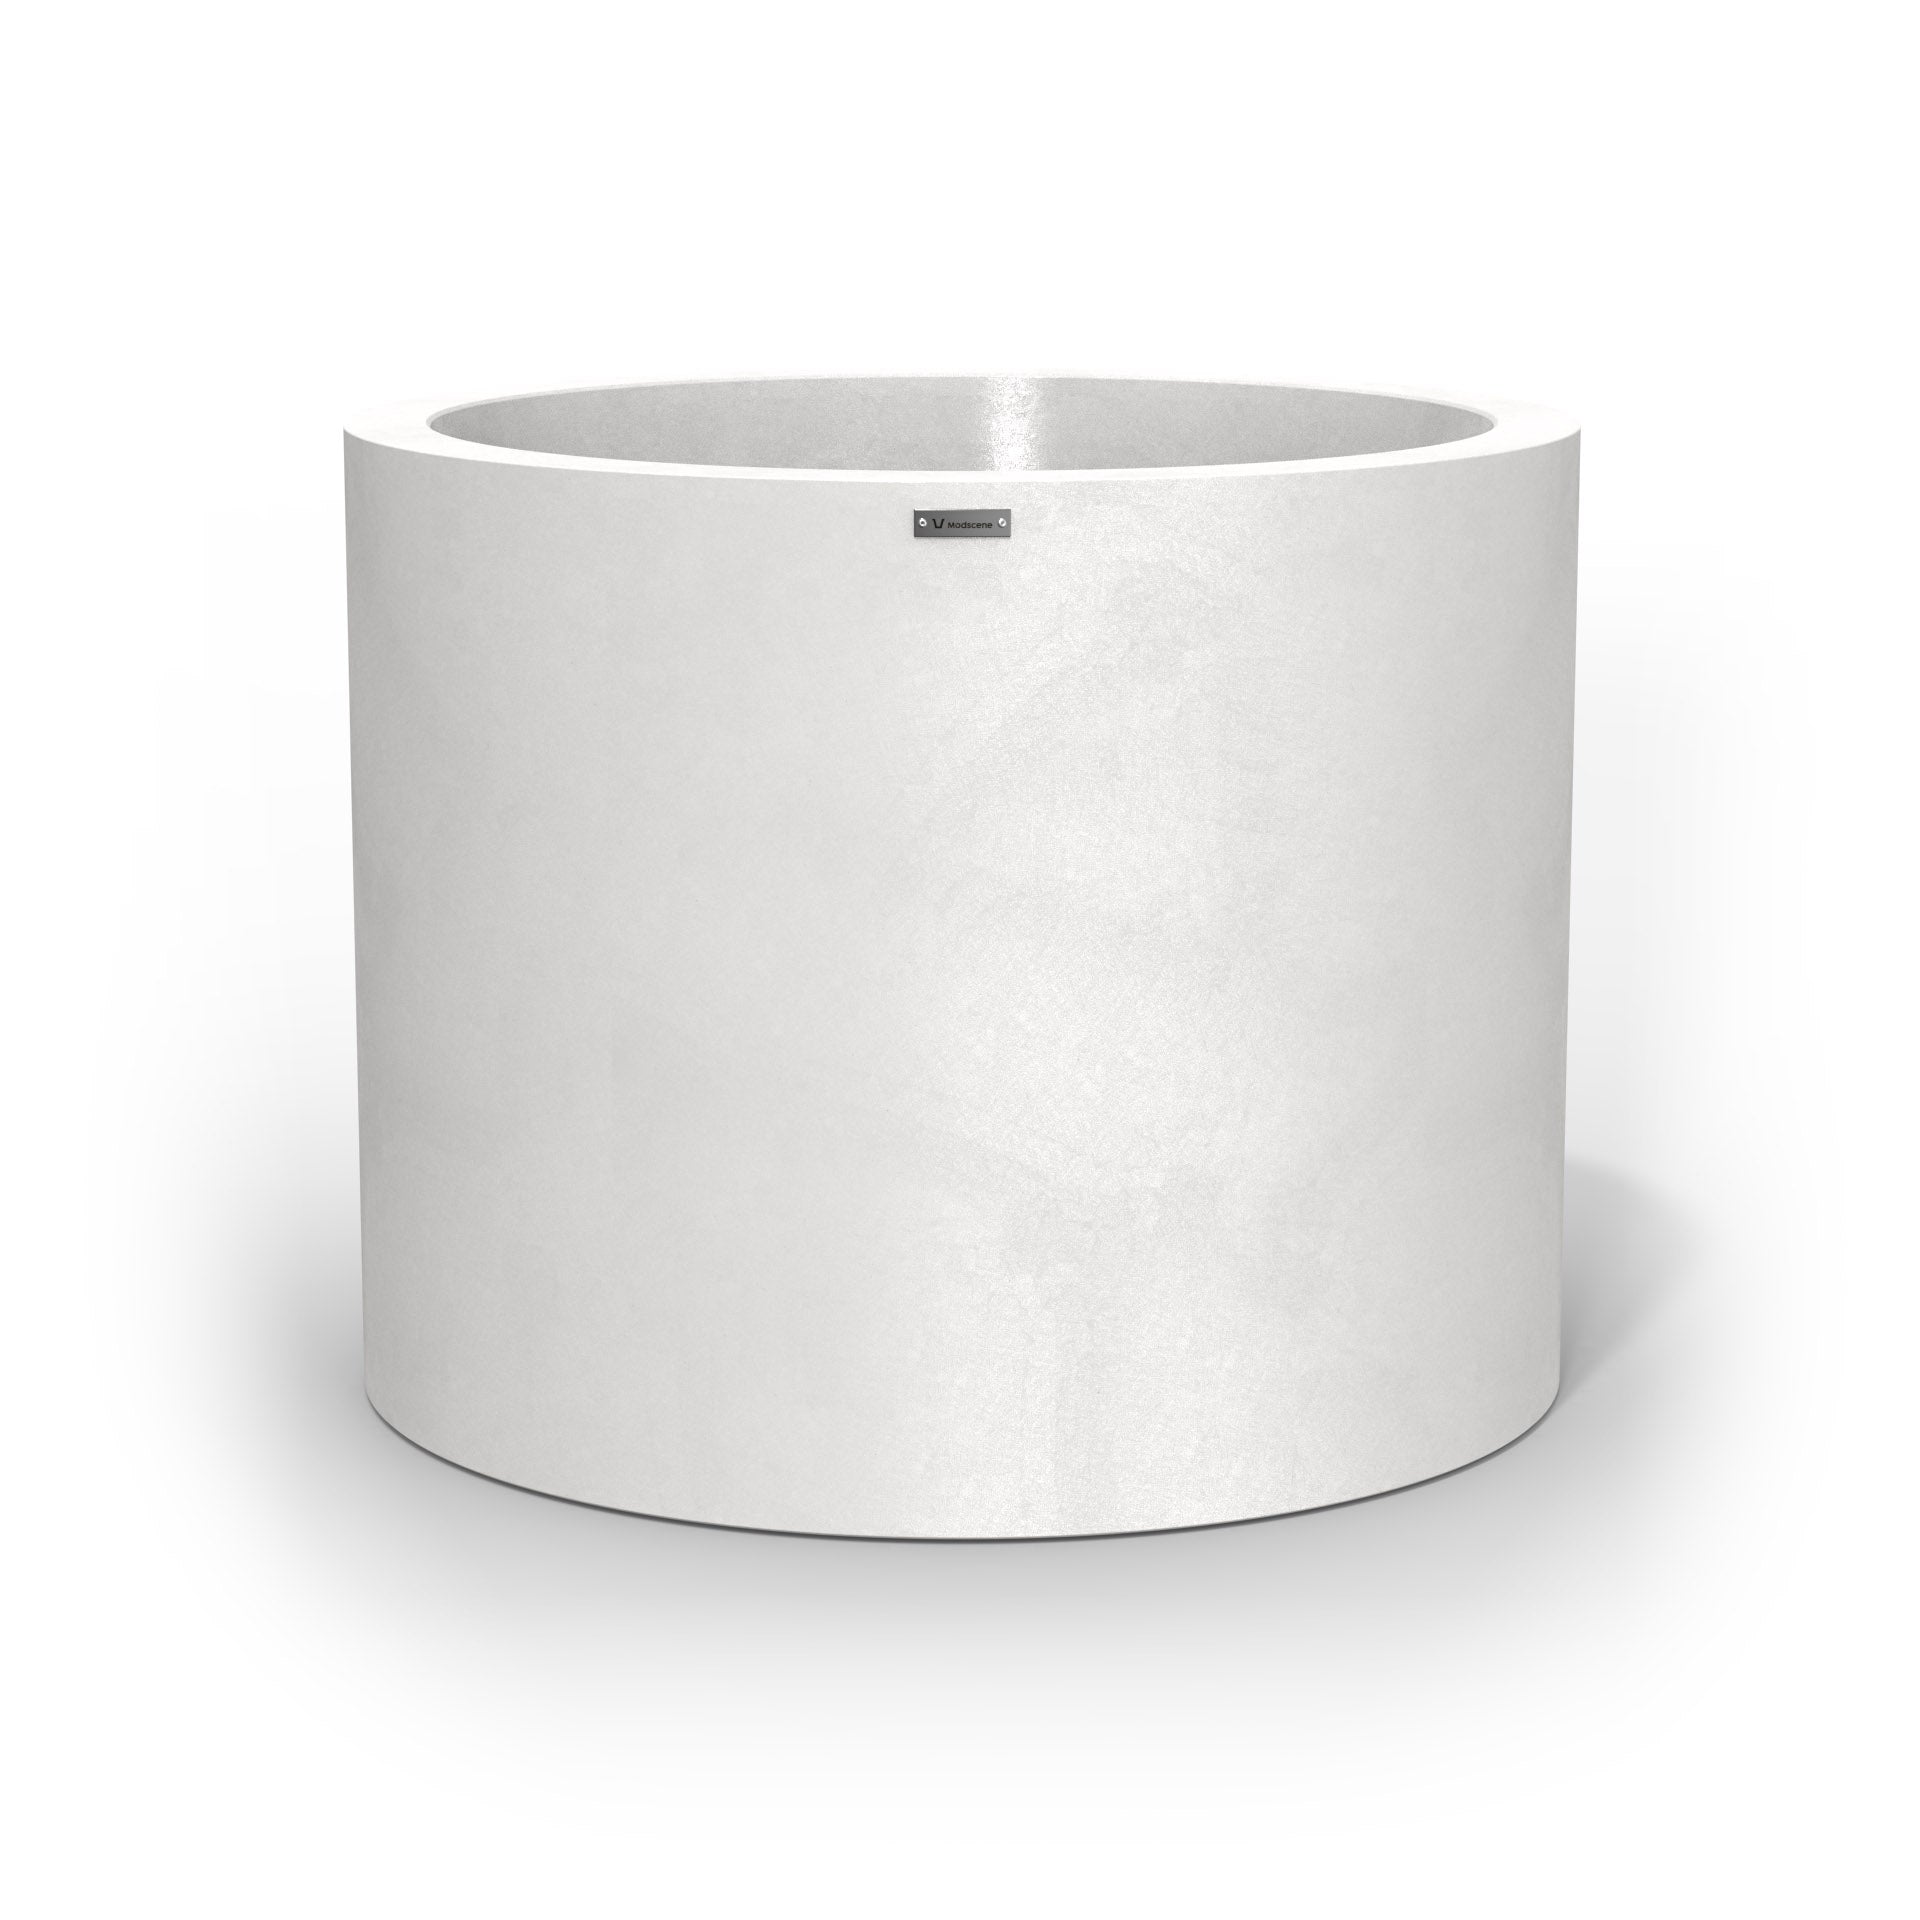 An extra large cylinder pot planter in a matte white colour. Made by Modscene NZ.